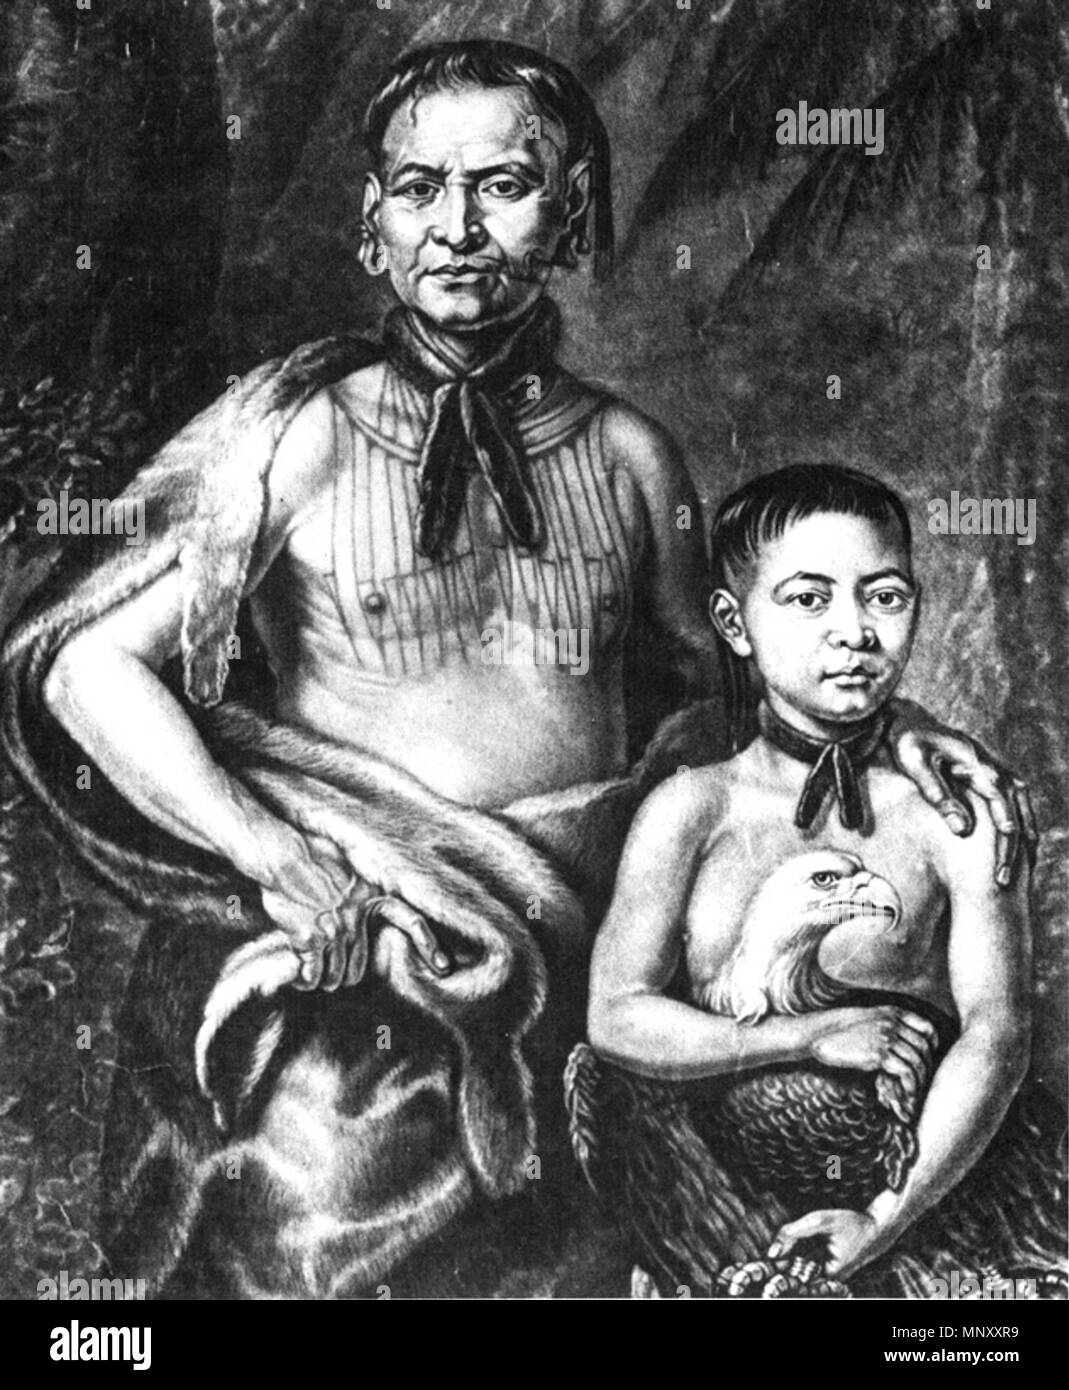 . English: http://www.georgiaencyclopedia.org/nge/Multimedia.jsp?id=m-1123 Tomochichi and his nephew Toonahowi, engraving by John Faber jr., made around 1734-1735 en:Category:United States history images en:Category:Portraits . 29 May 2006 (original upload date). Original uploader was Asarelah at en.wikipedia 1199 Tomochichi Stock Photo